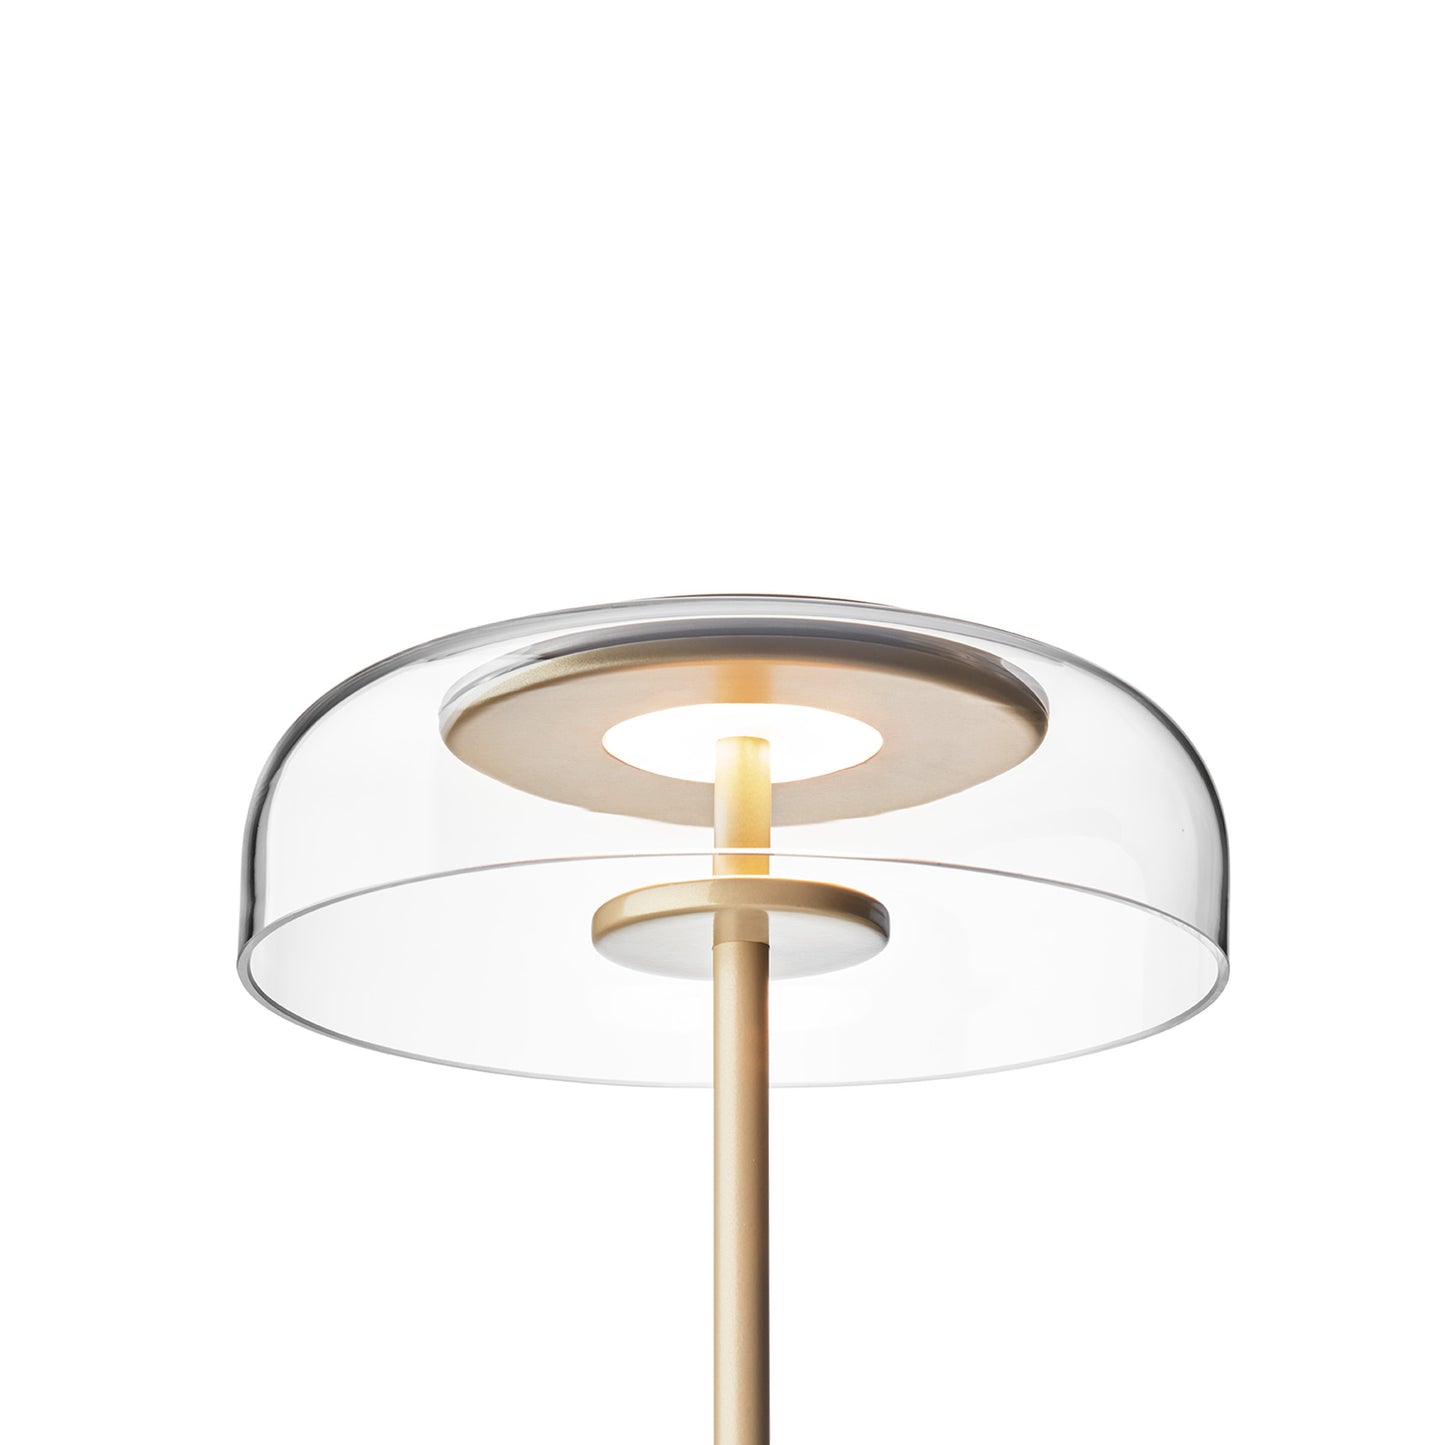 NUURA Blossi Table - Nordic Gold with Clear Glass Shade - Twenty Five Percent Discount